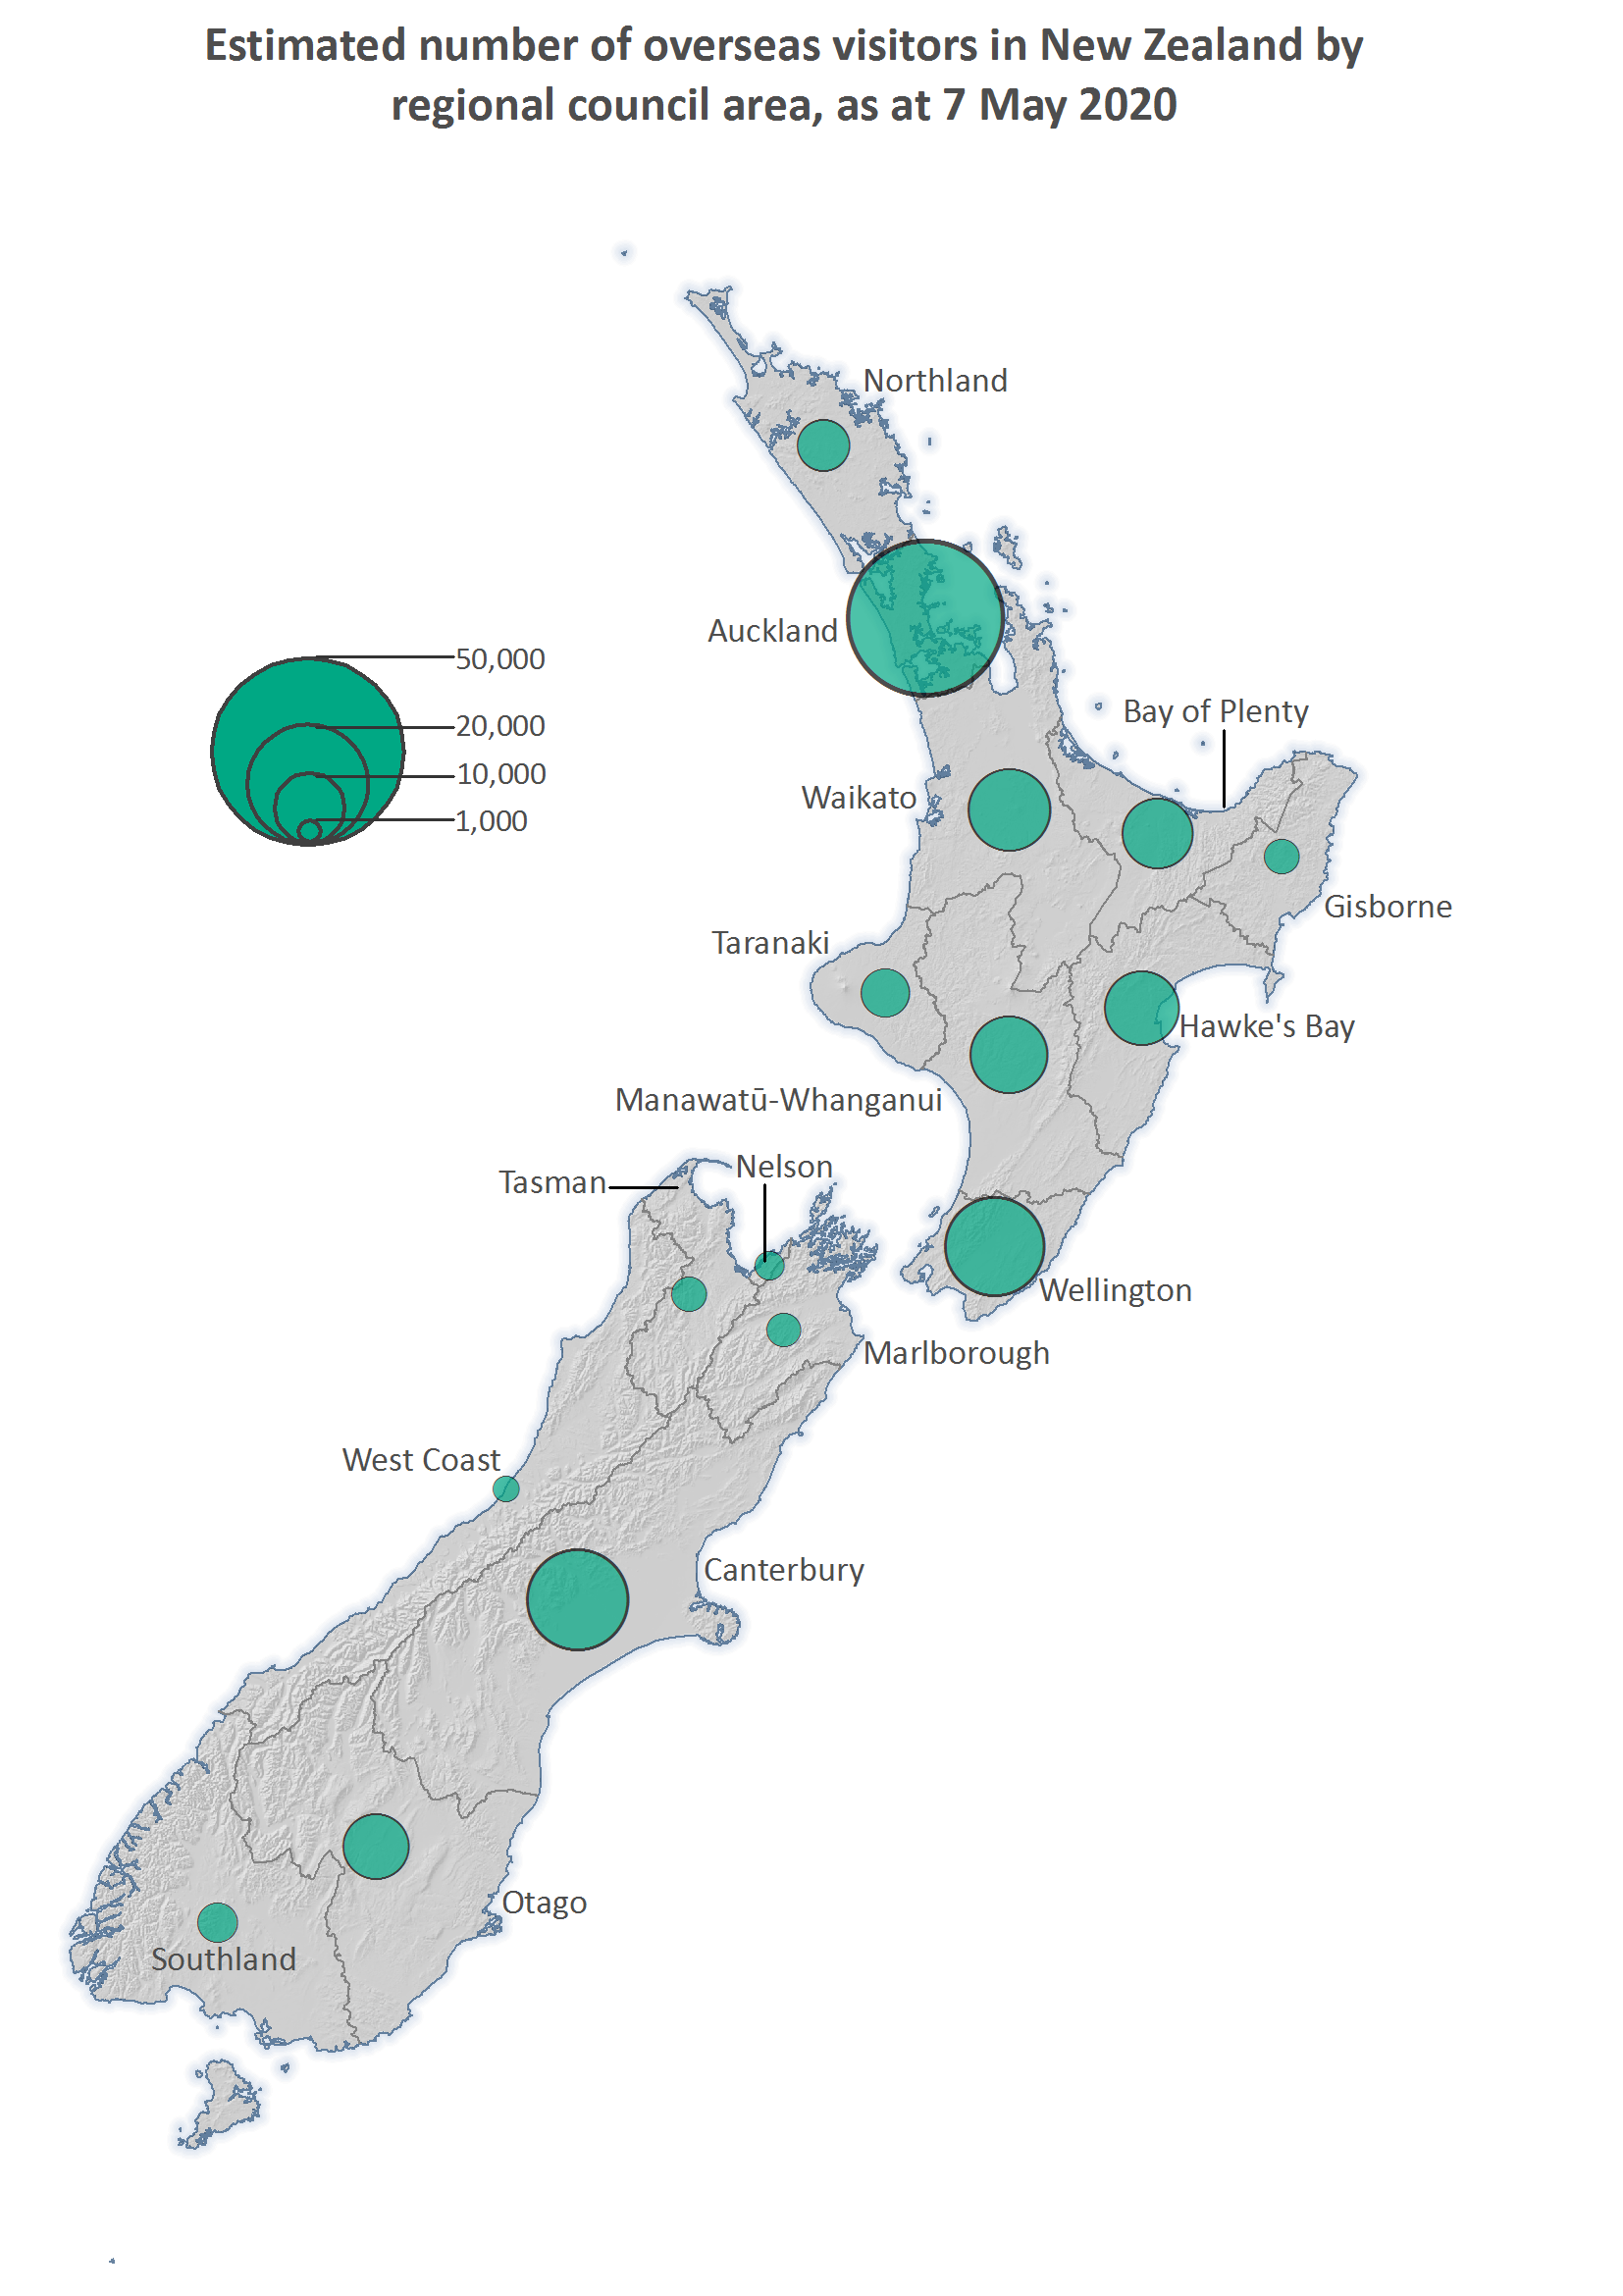 Map showing estimated number of overseas visitors in New Zealand by regional council area, as at 7 May 2020. Text alternative available below map.